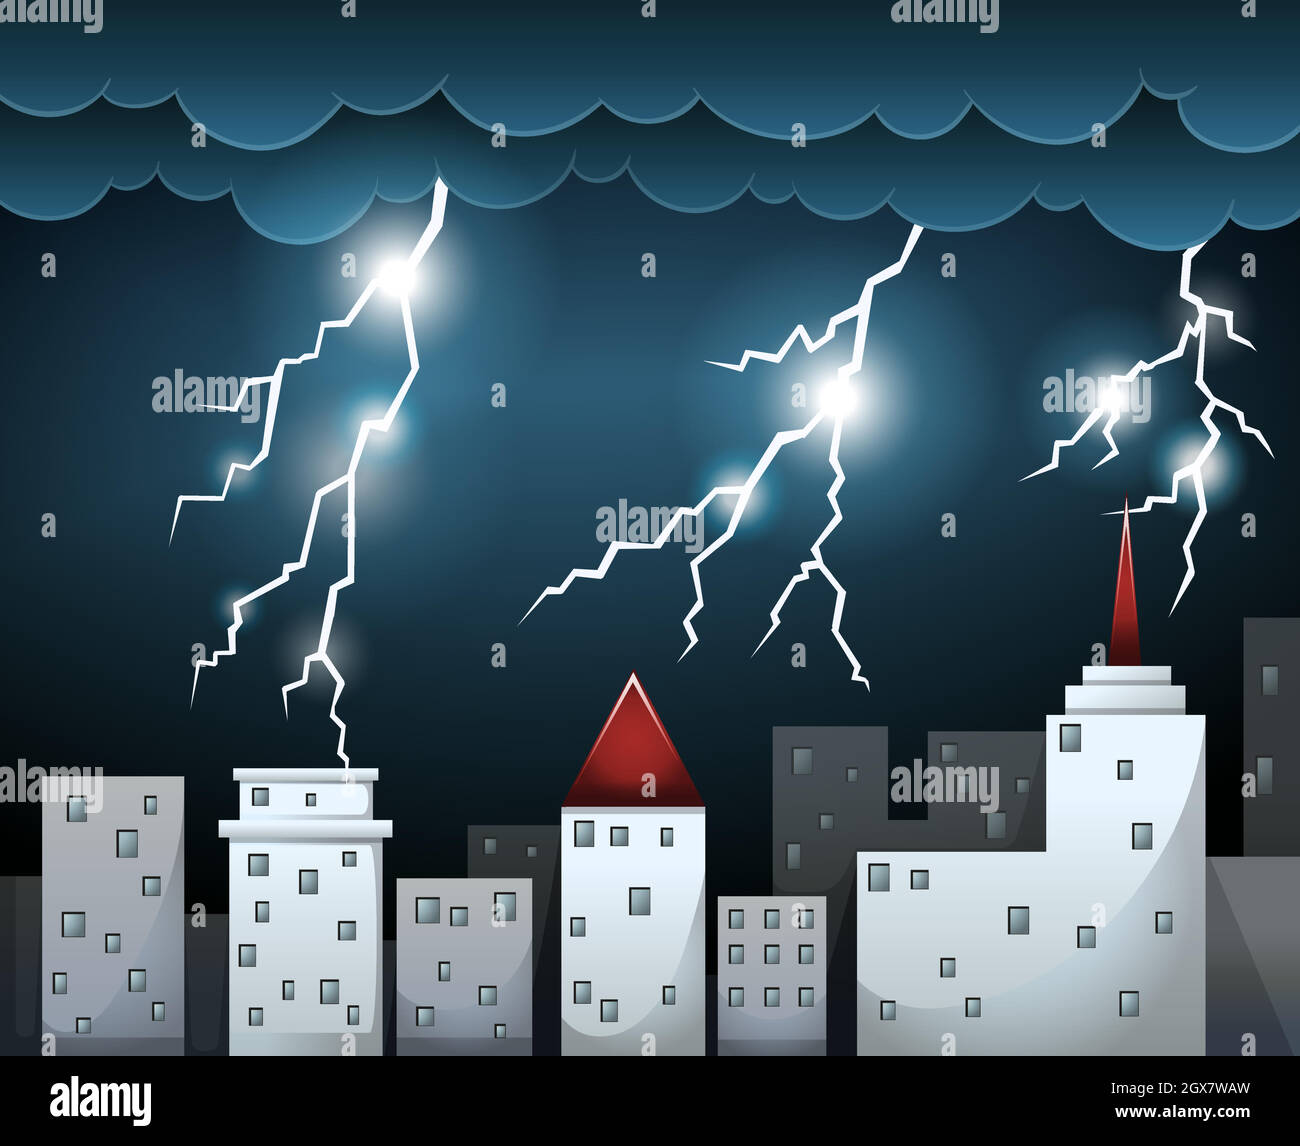 Thunderstorm and dark clouds over city Stock Vector